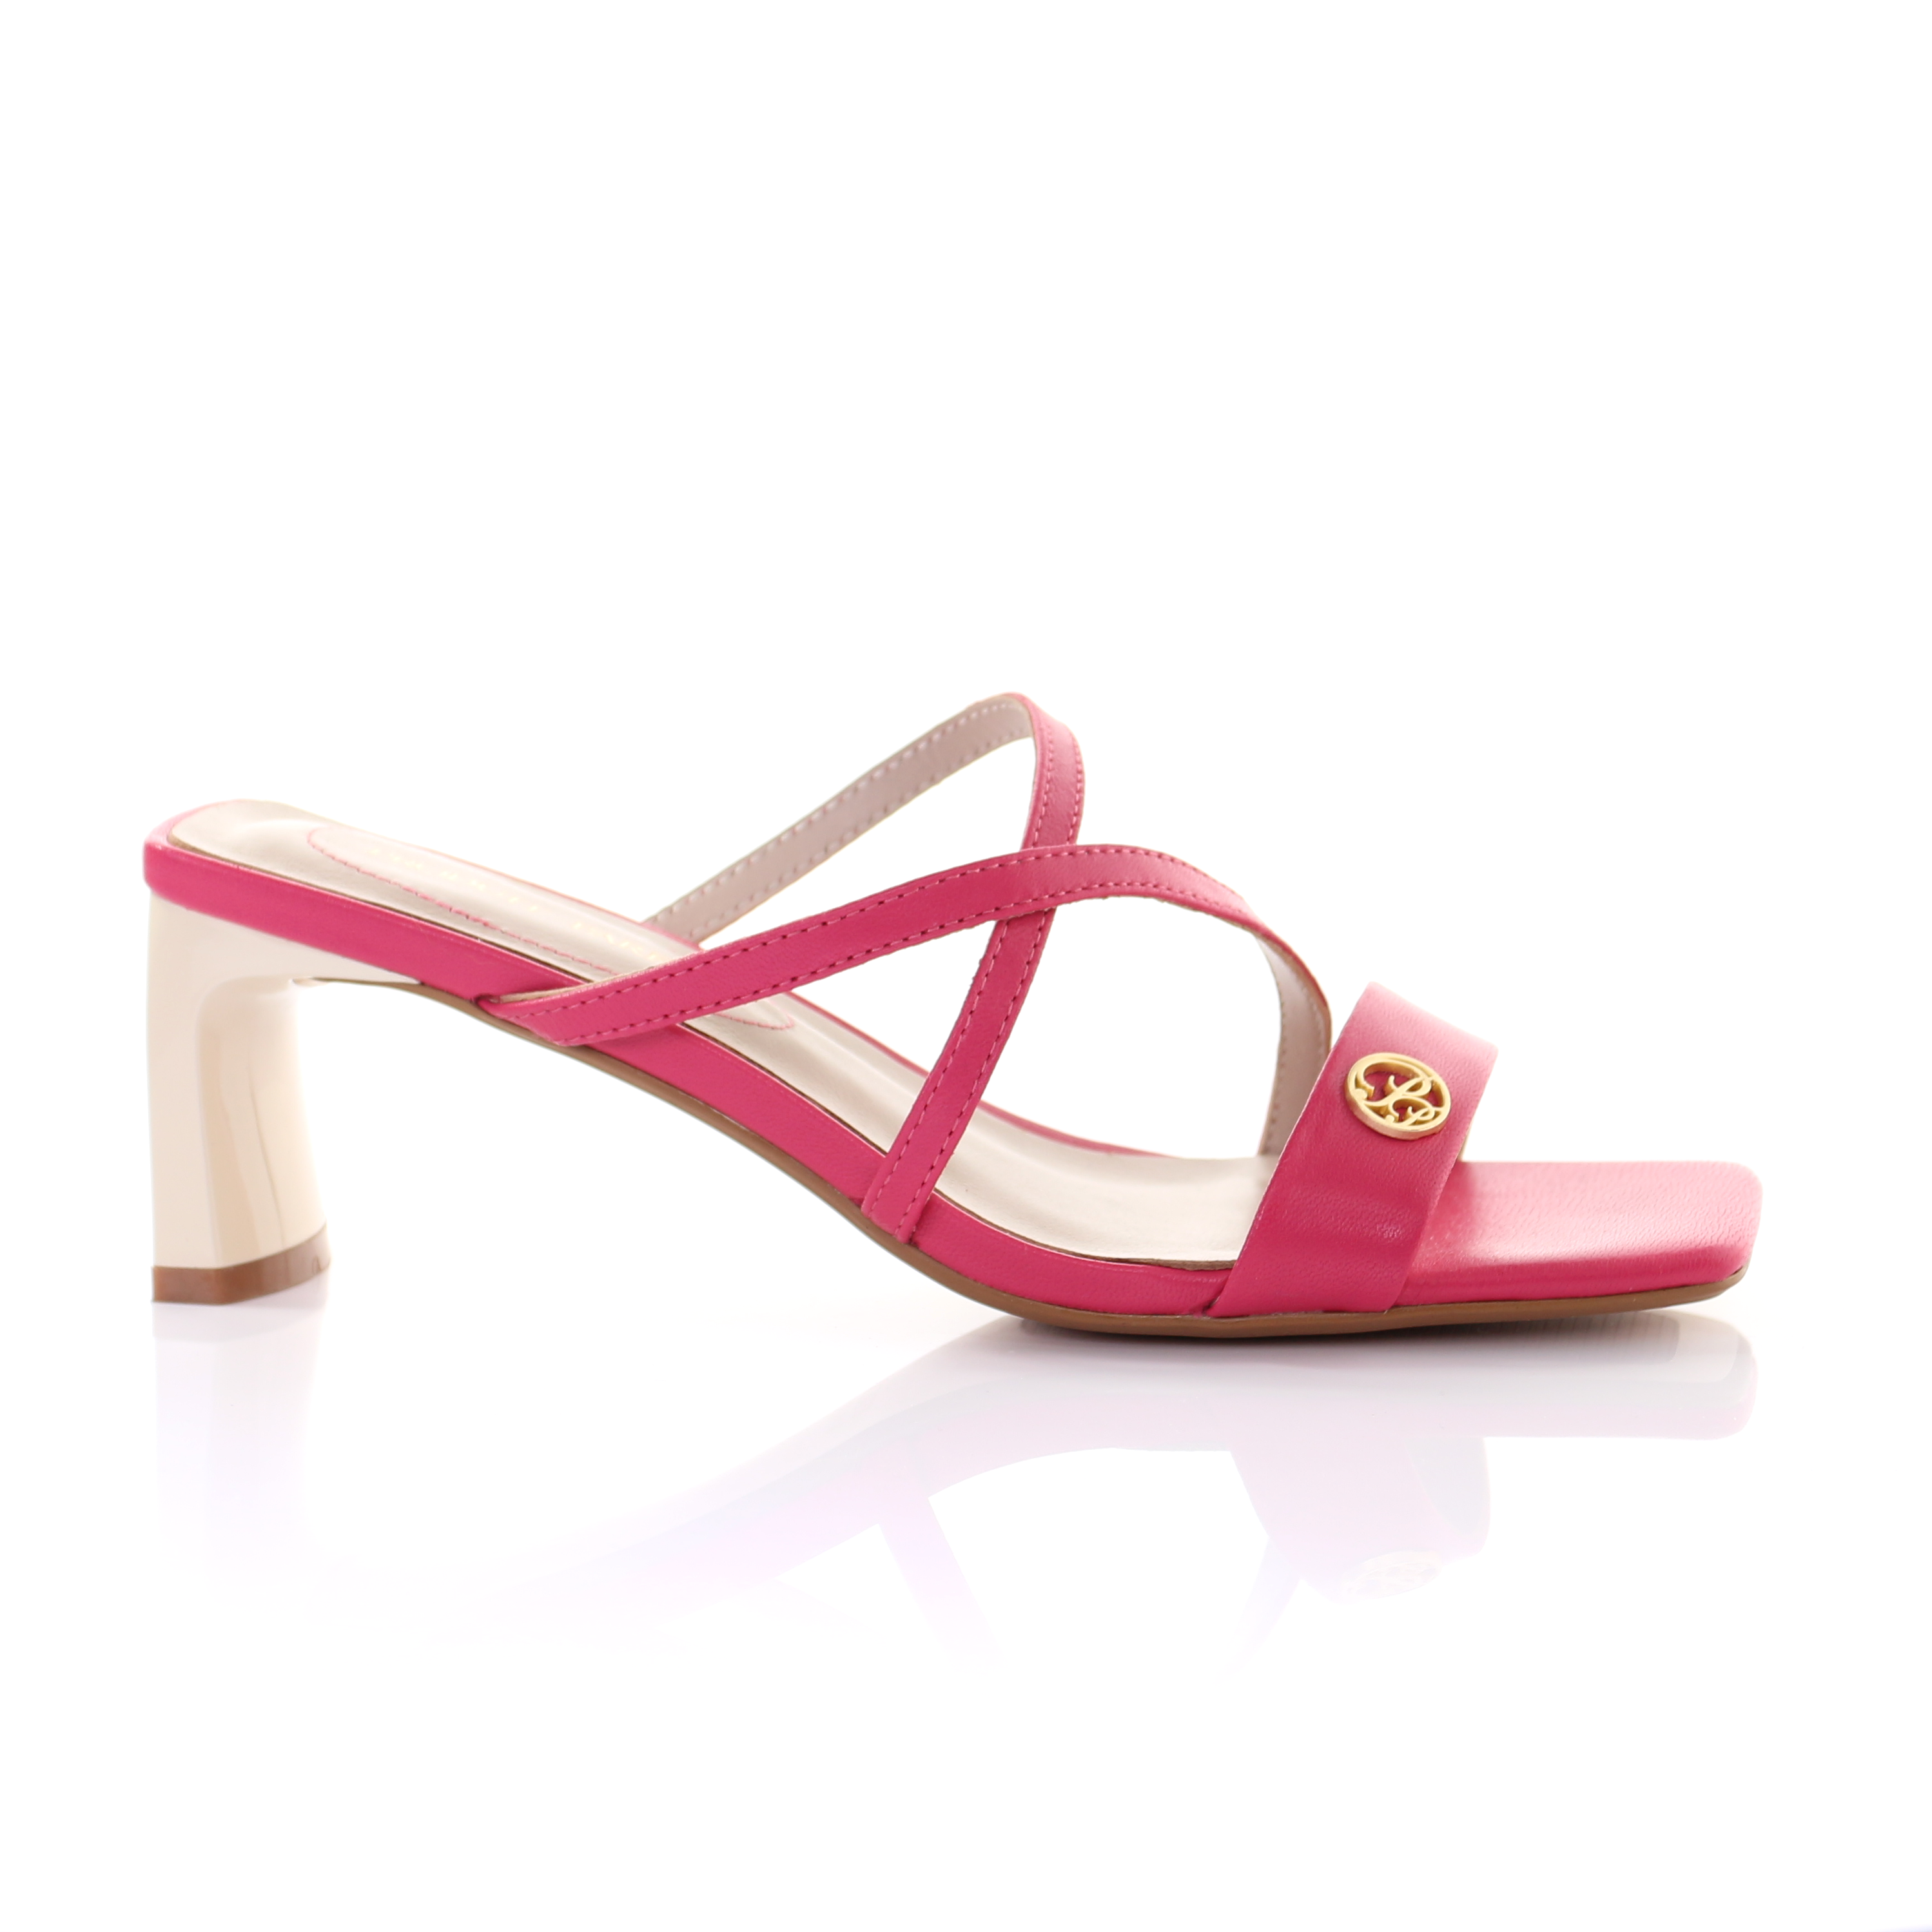 Dr. Martens Voss II Quad Peach Leather Strap Sandals | Urban Outfitters UK